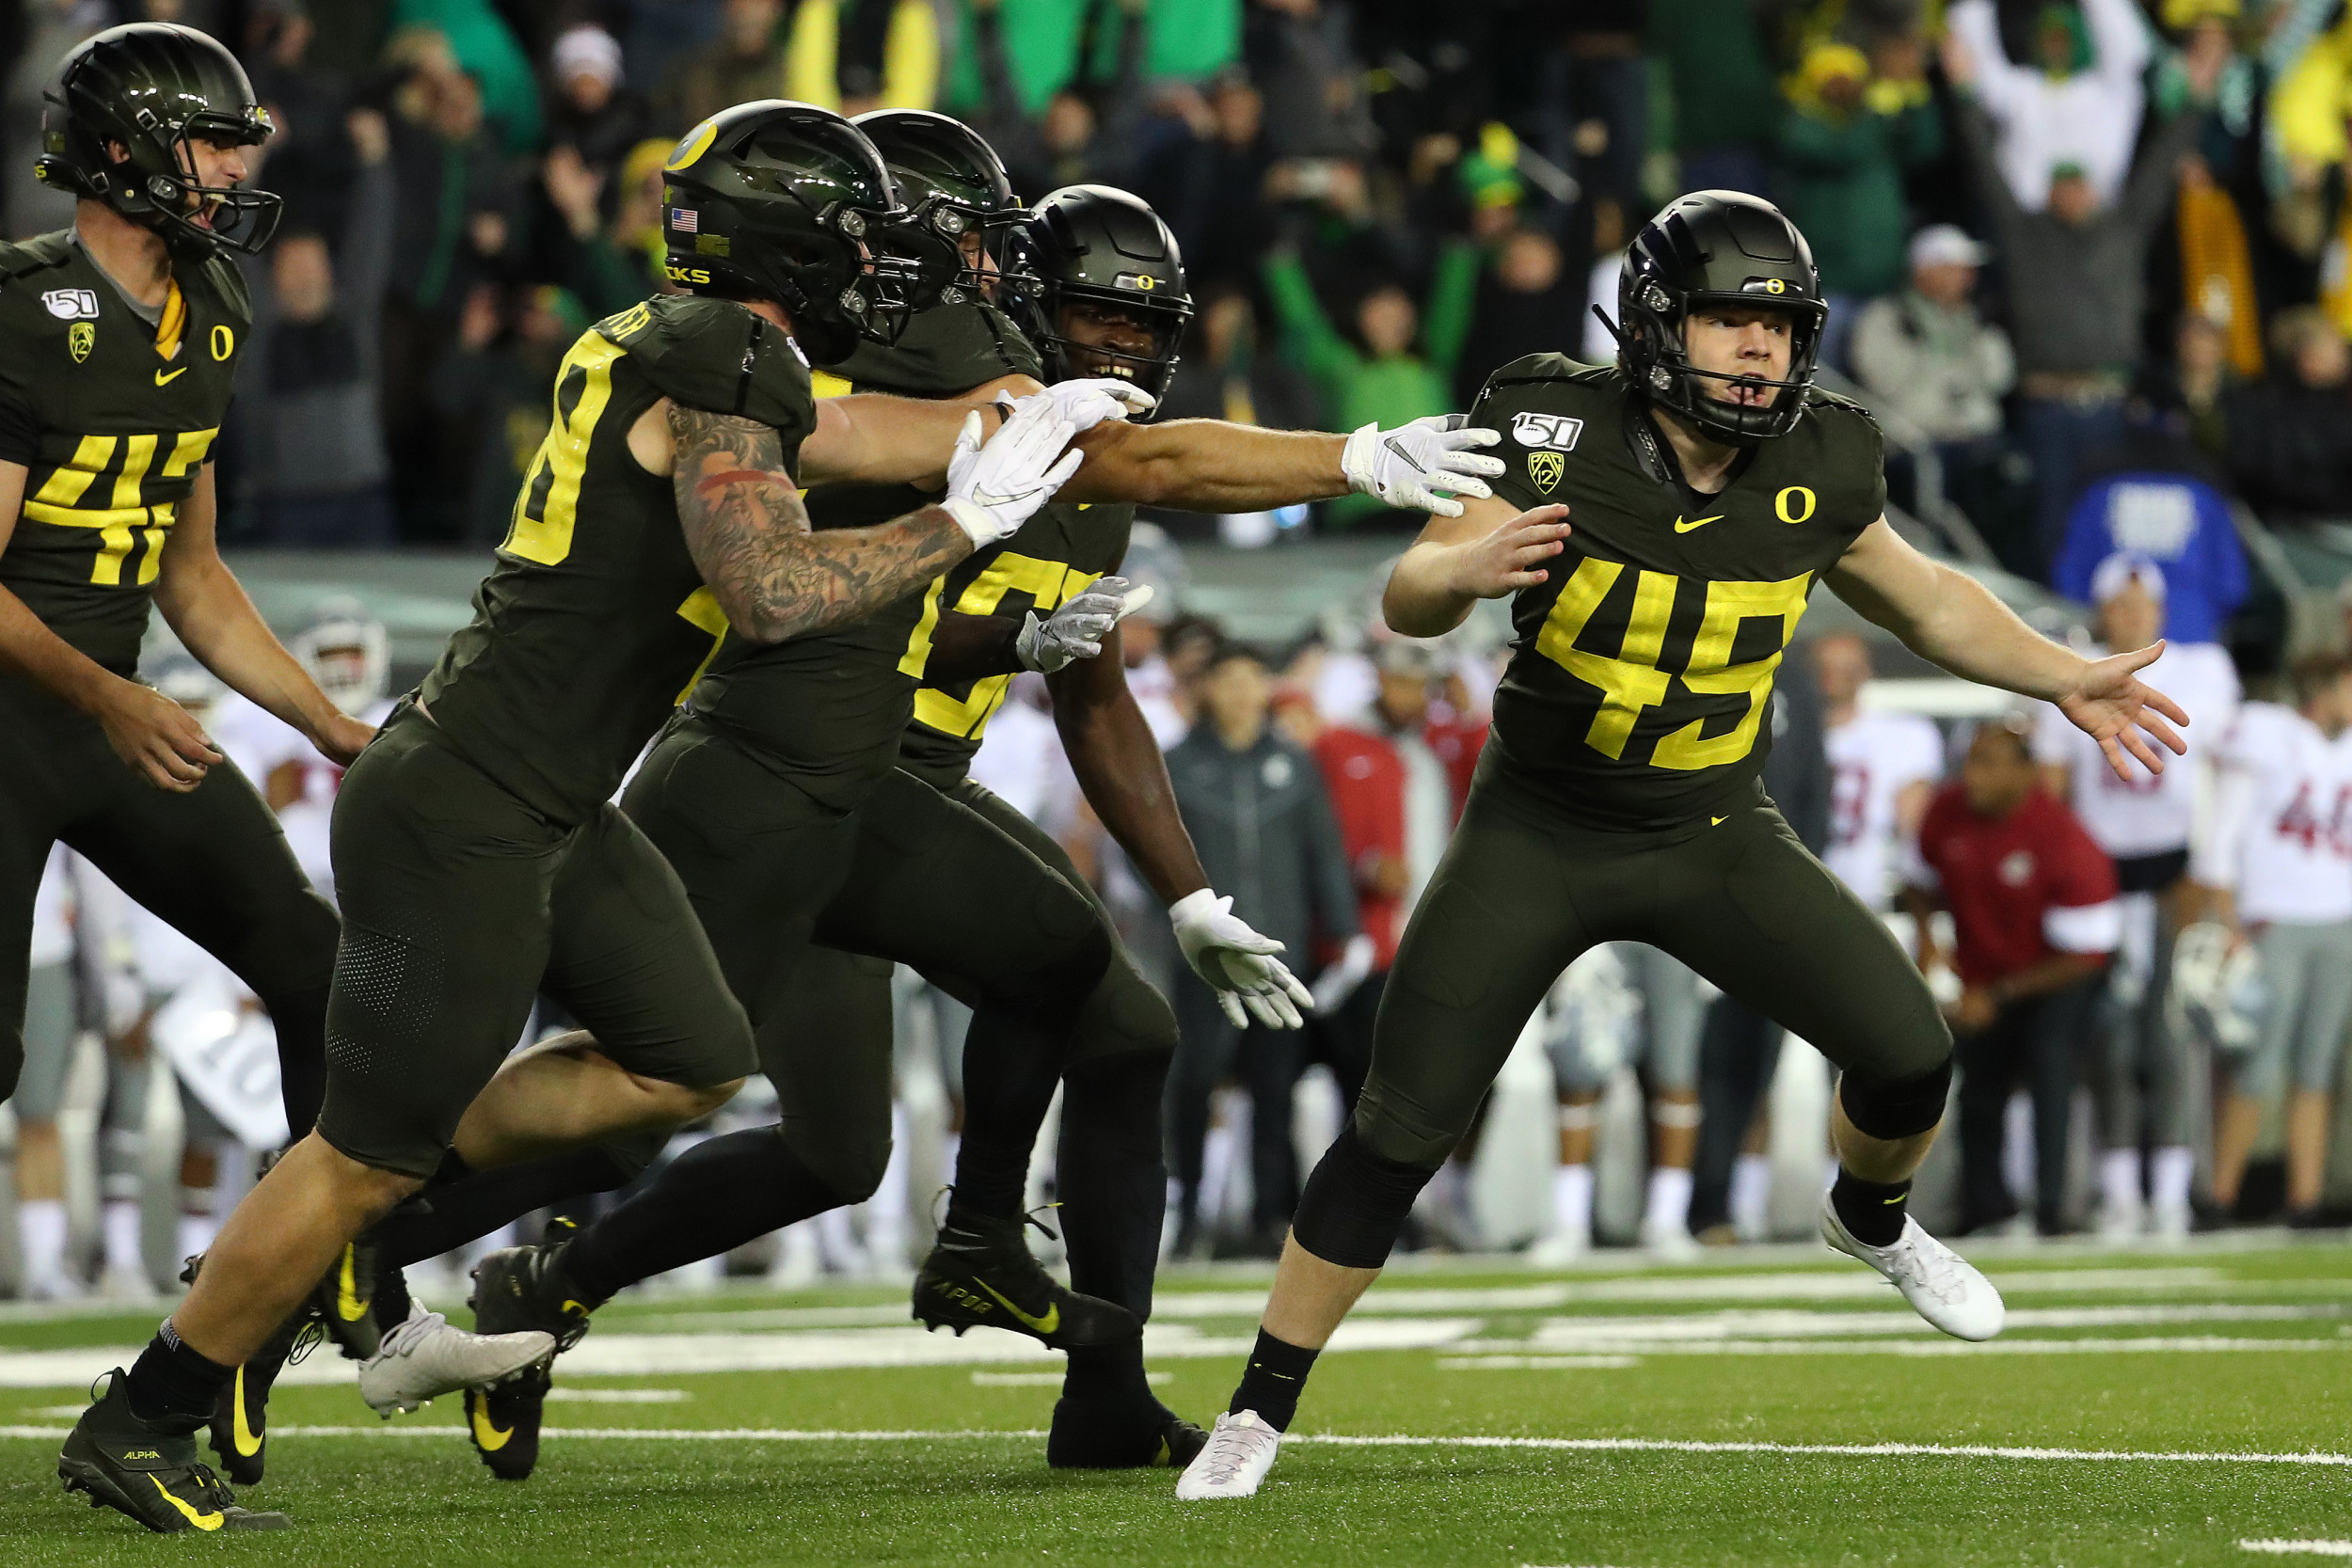 College Football TV Schedule 2019 Where to Watch Oregon vs